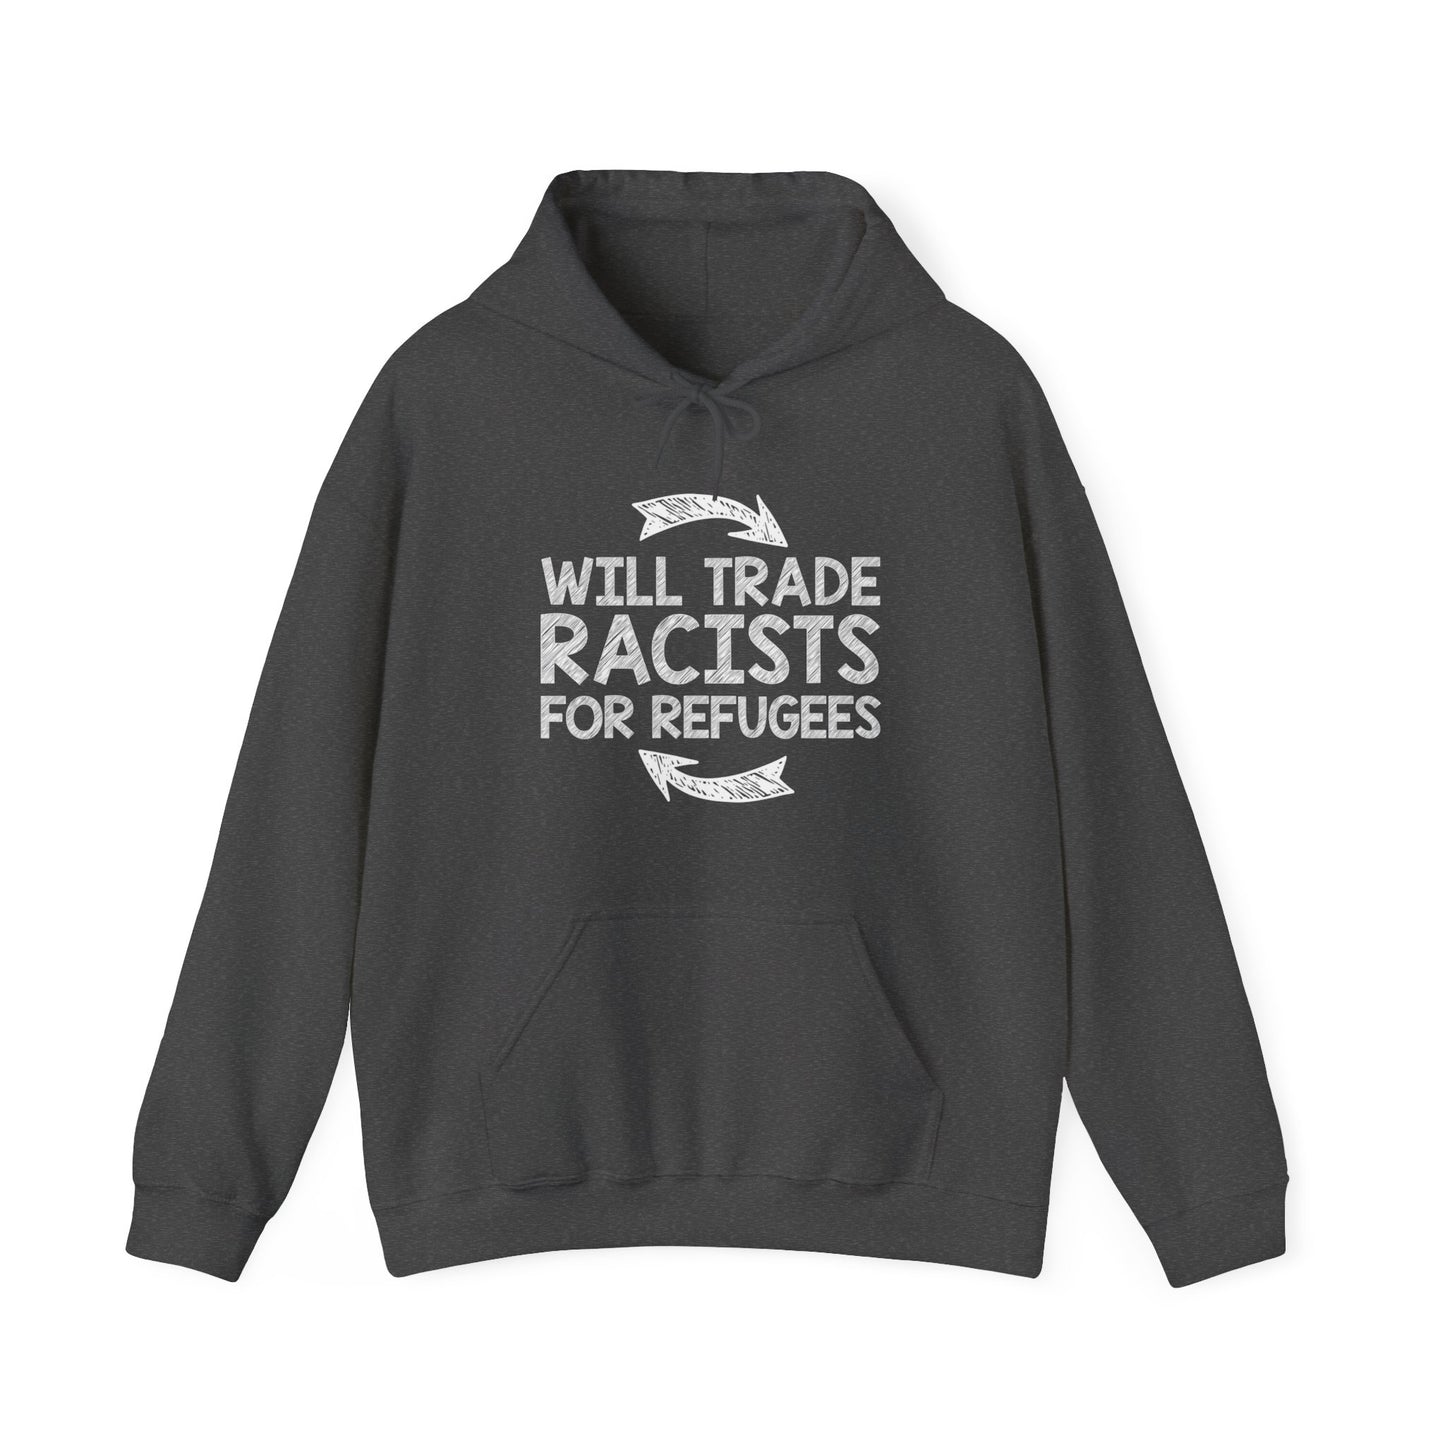 “Will Trade Racists for Refugees” Unisex Hoodie